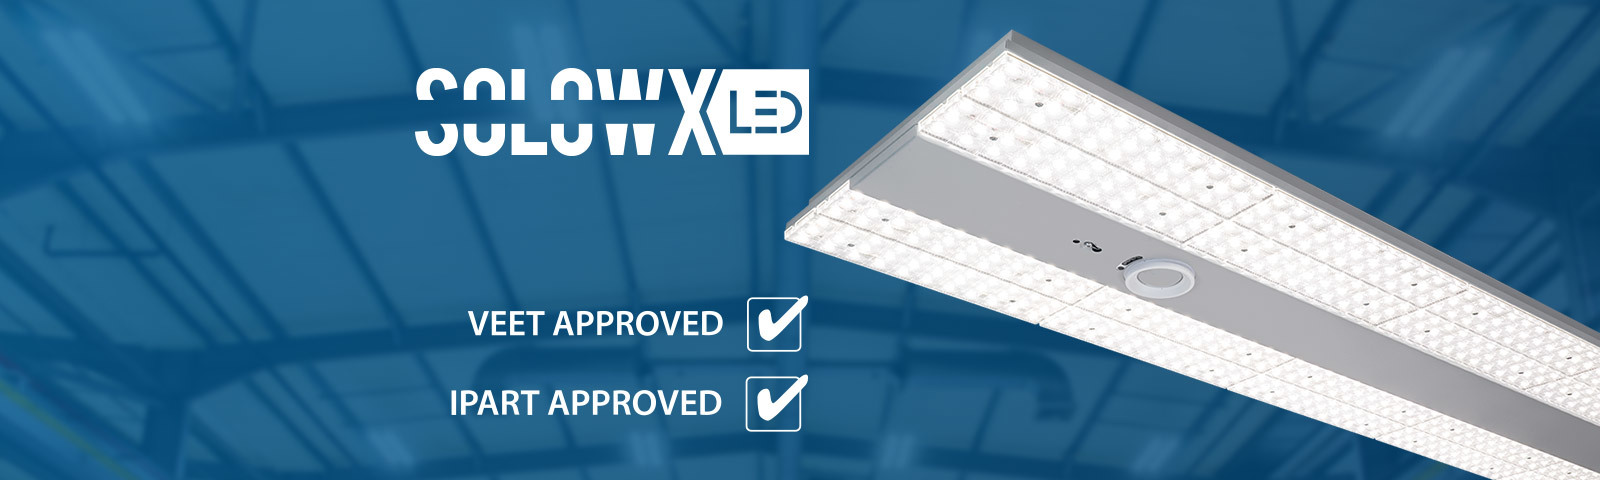 VEET and iPart approval for Solow XLED